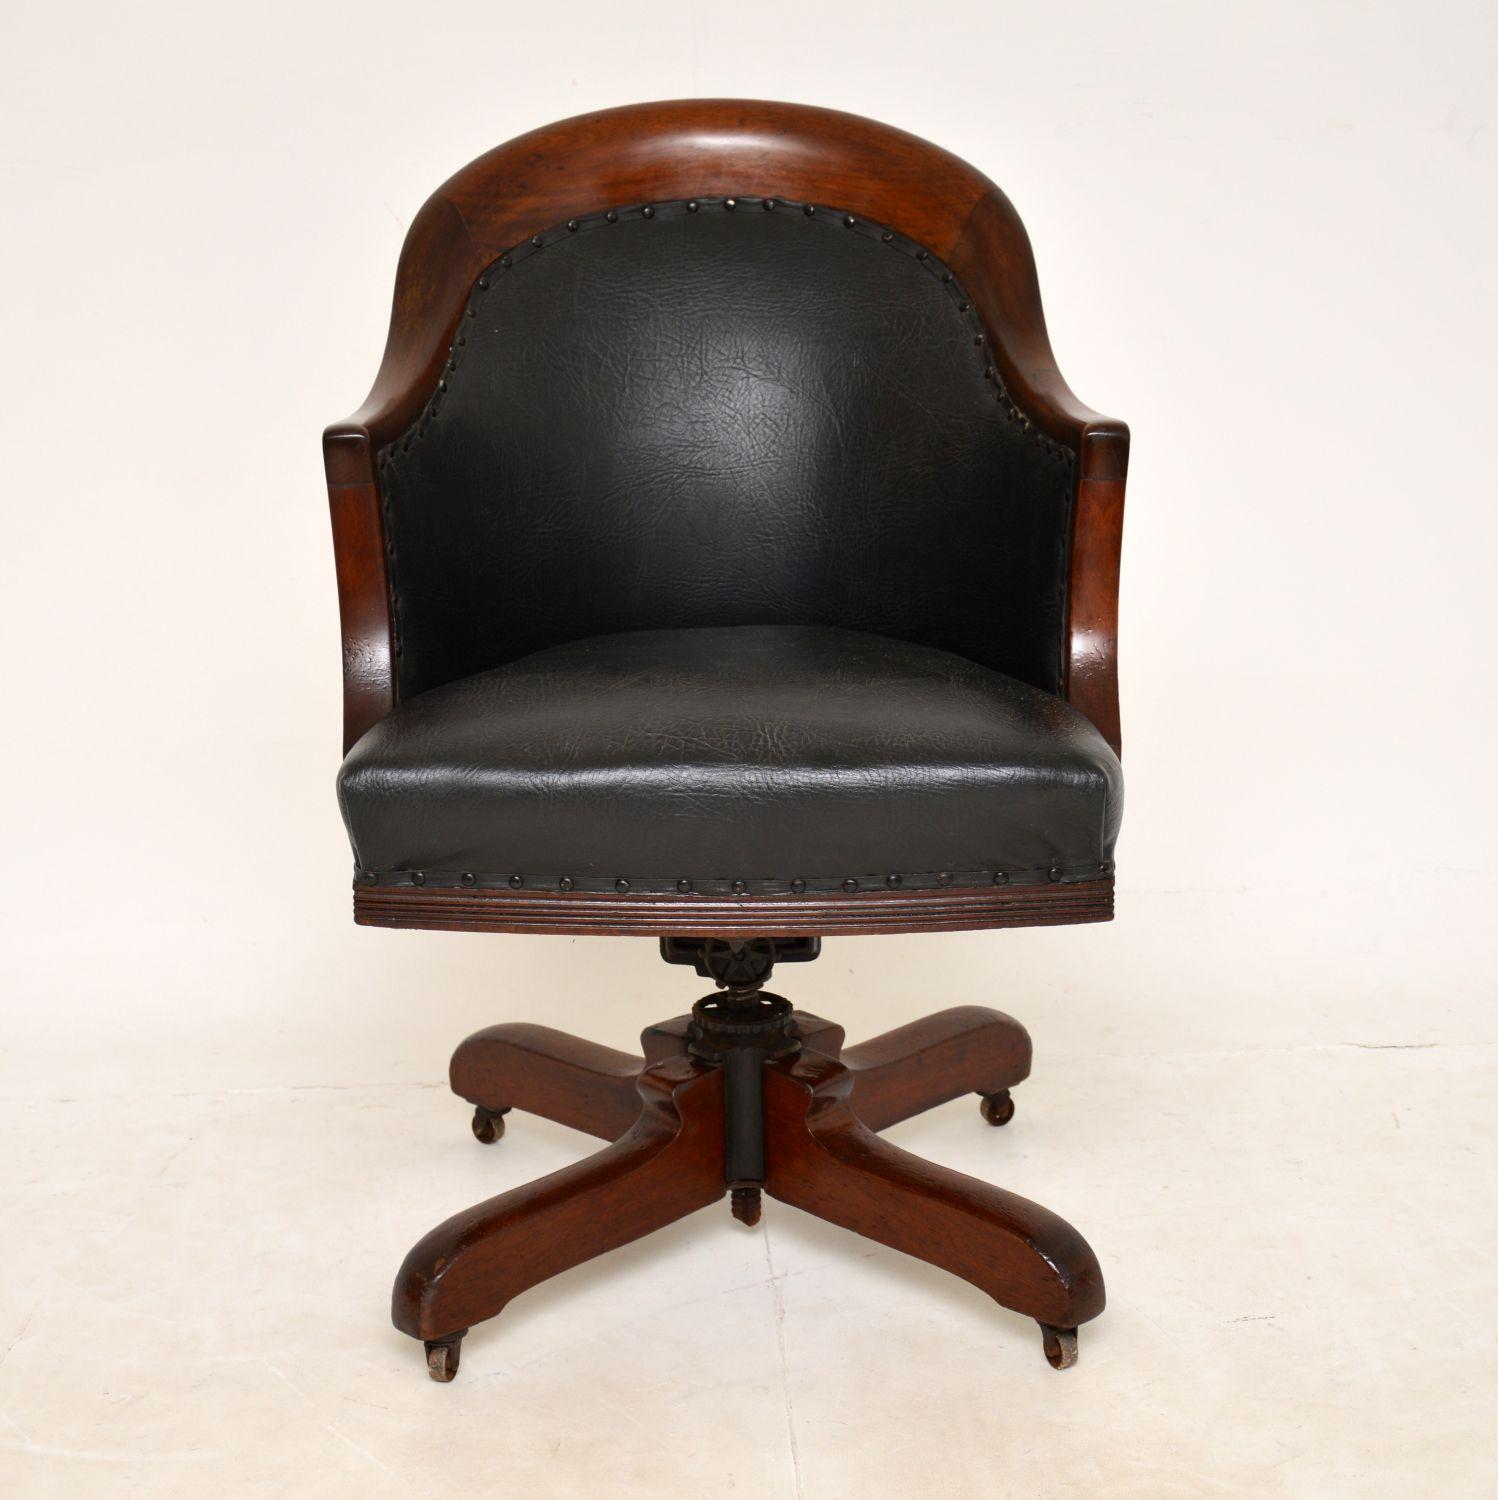 A fantastic original antique Victorian period desk chair with a solid wood frame. This was made in England, it dates from around the 1880-1900’s.

The quality is amazing, this is a great size and is very comfortable. It swivels smoothly, rolls on